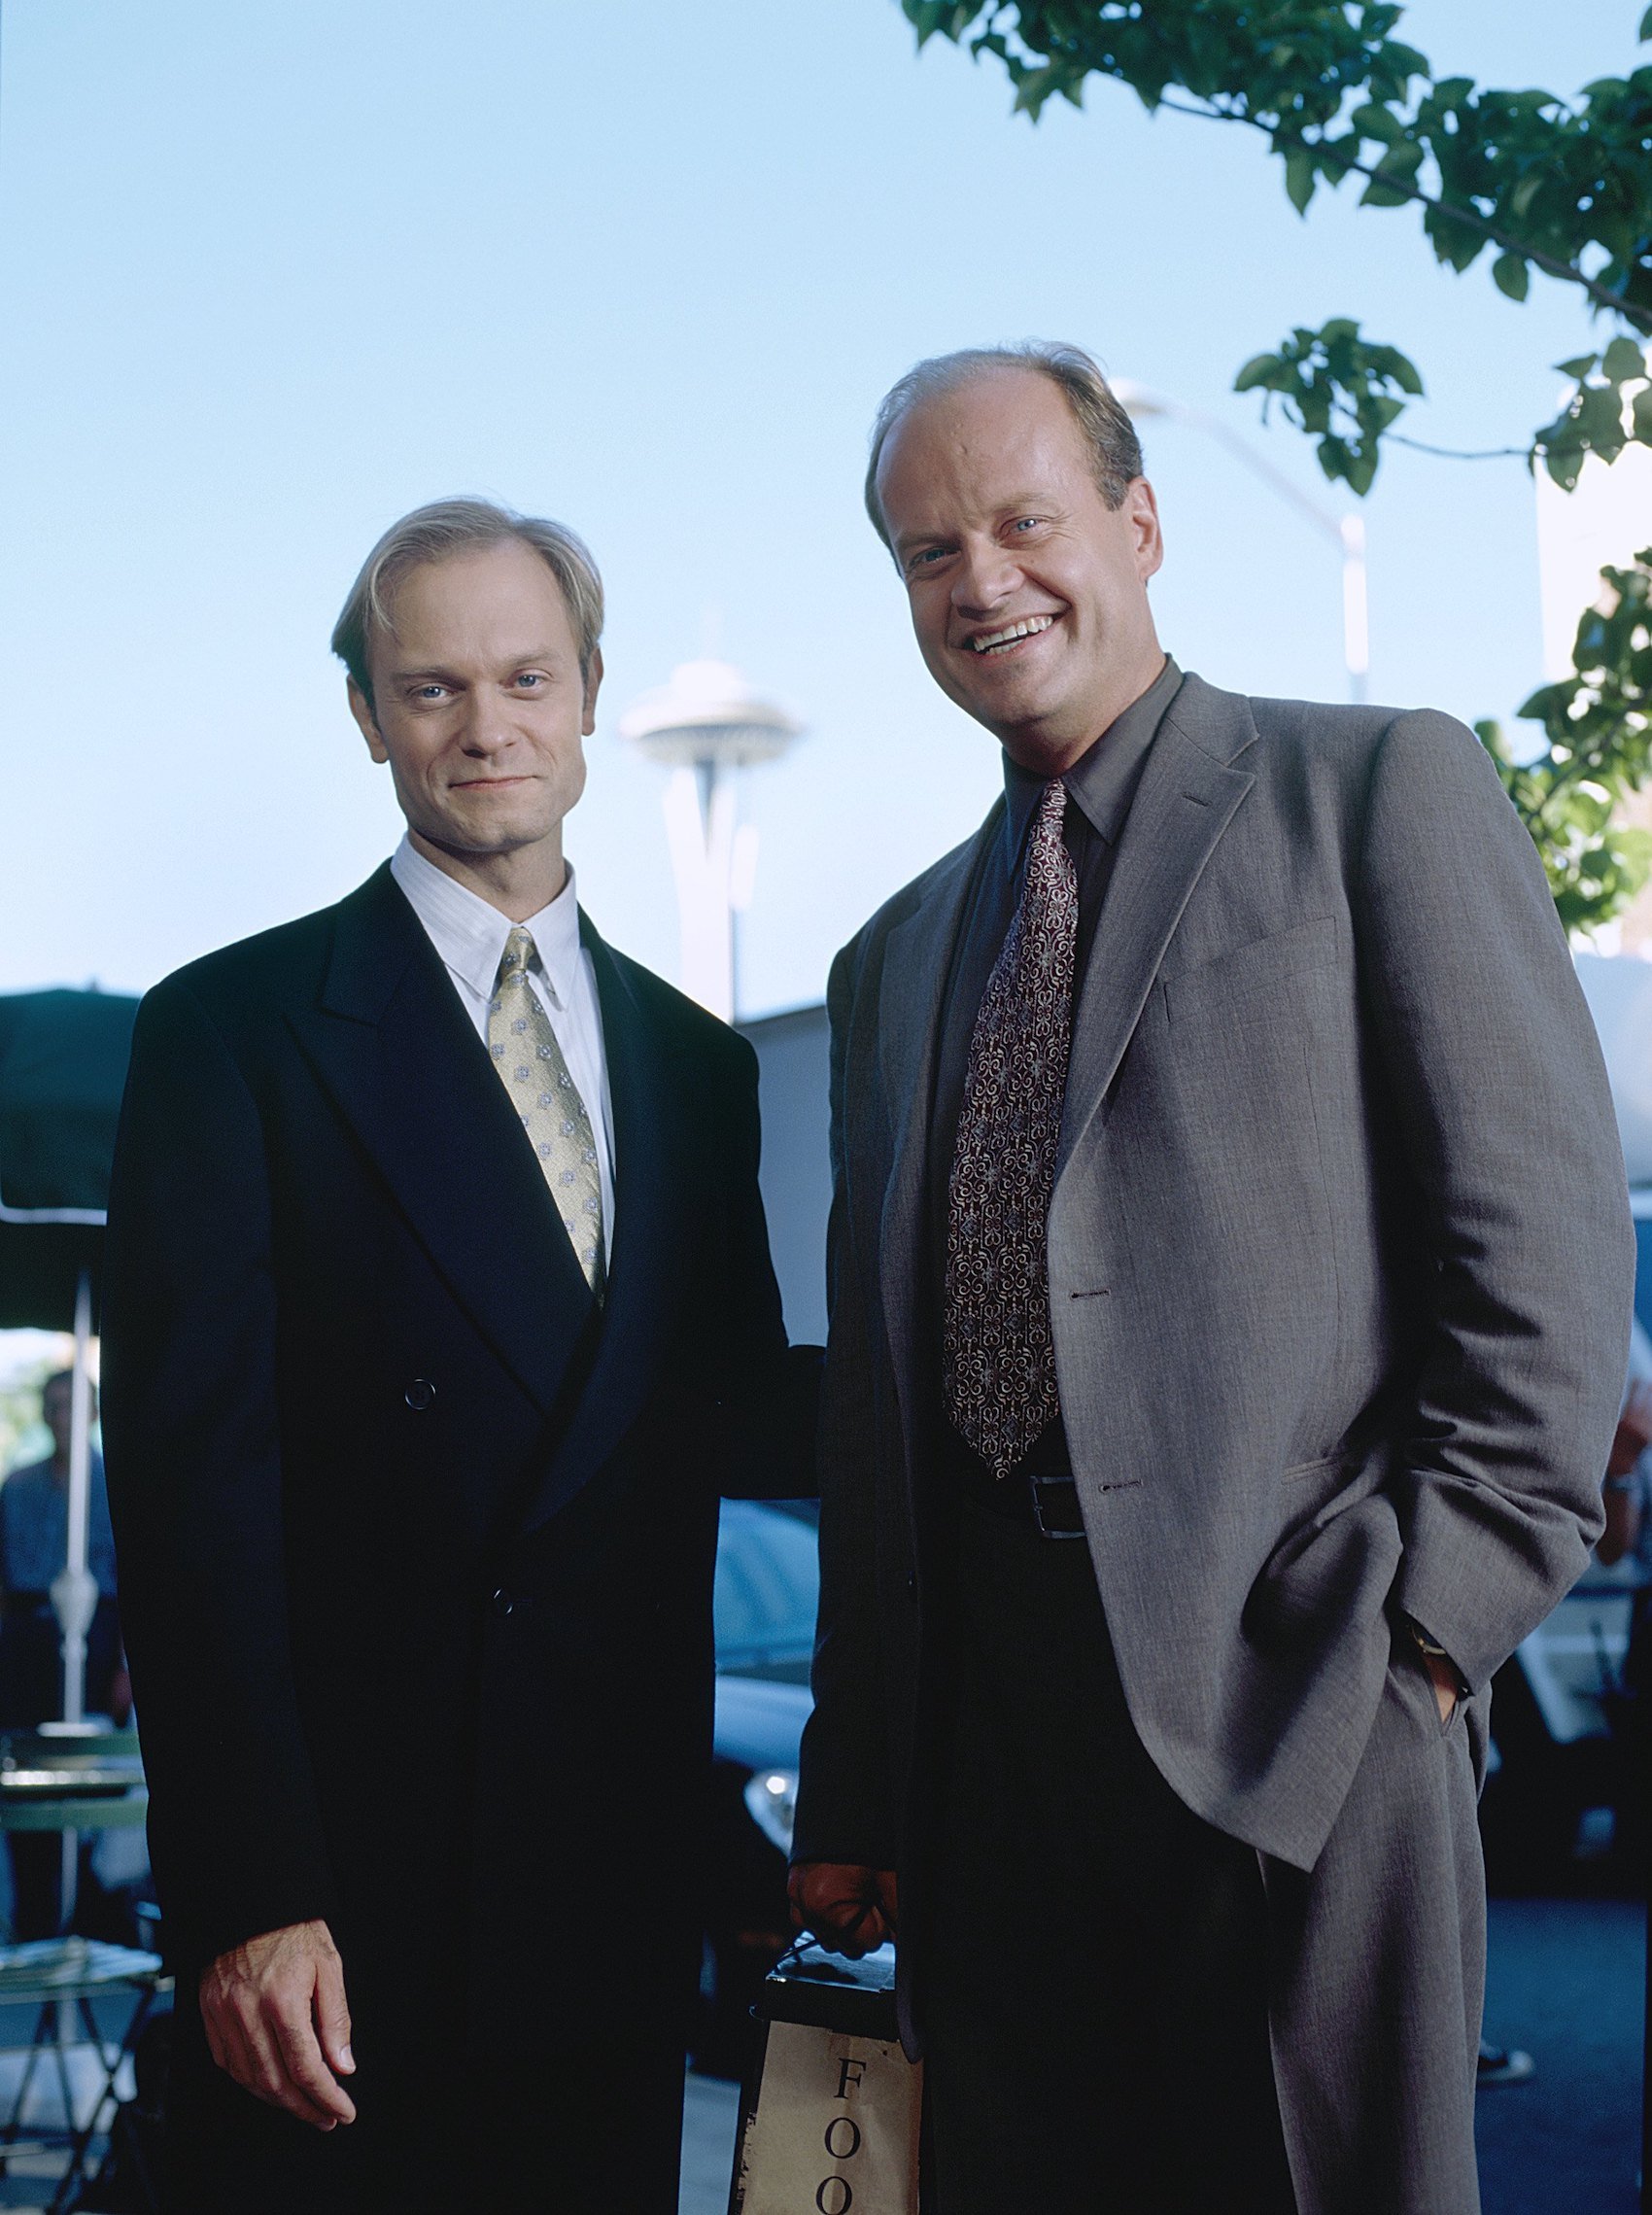 David Hyde Pierce and Kelsey Grammer standing in front of the Space Needle in 'Frasier'